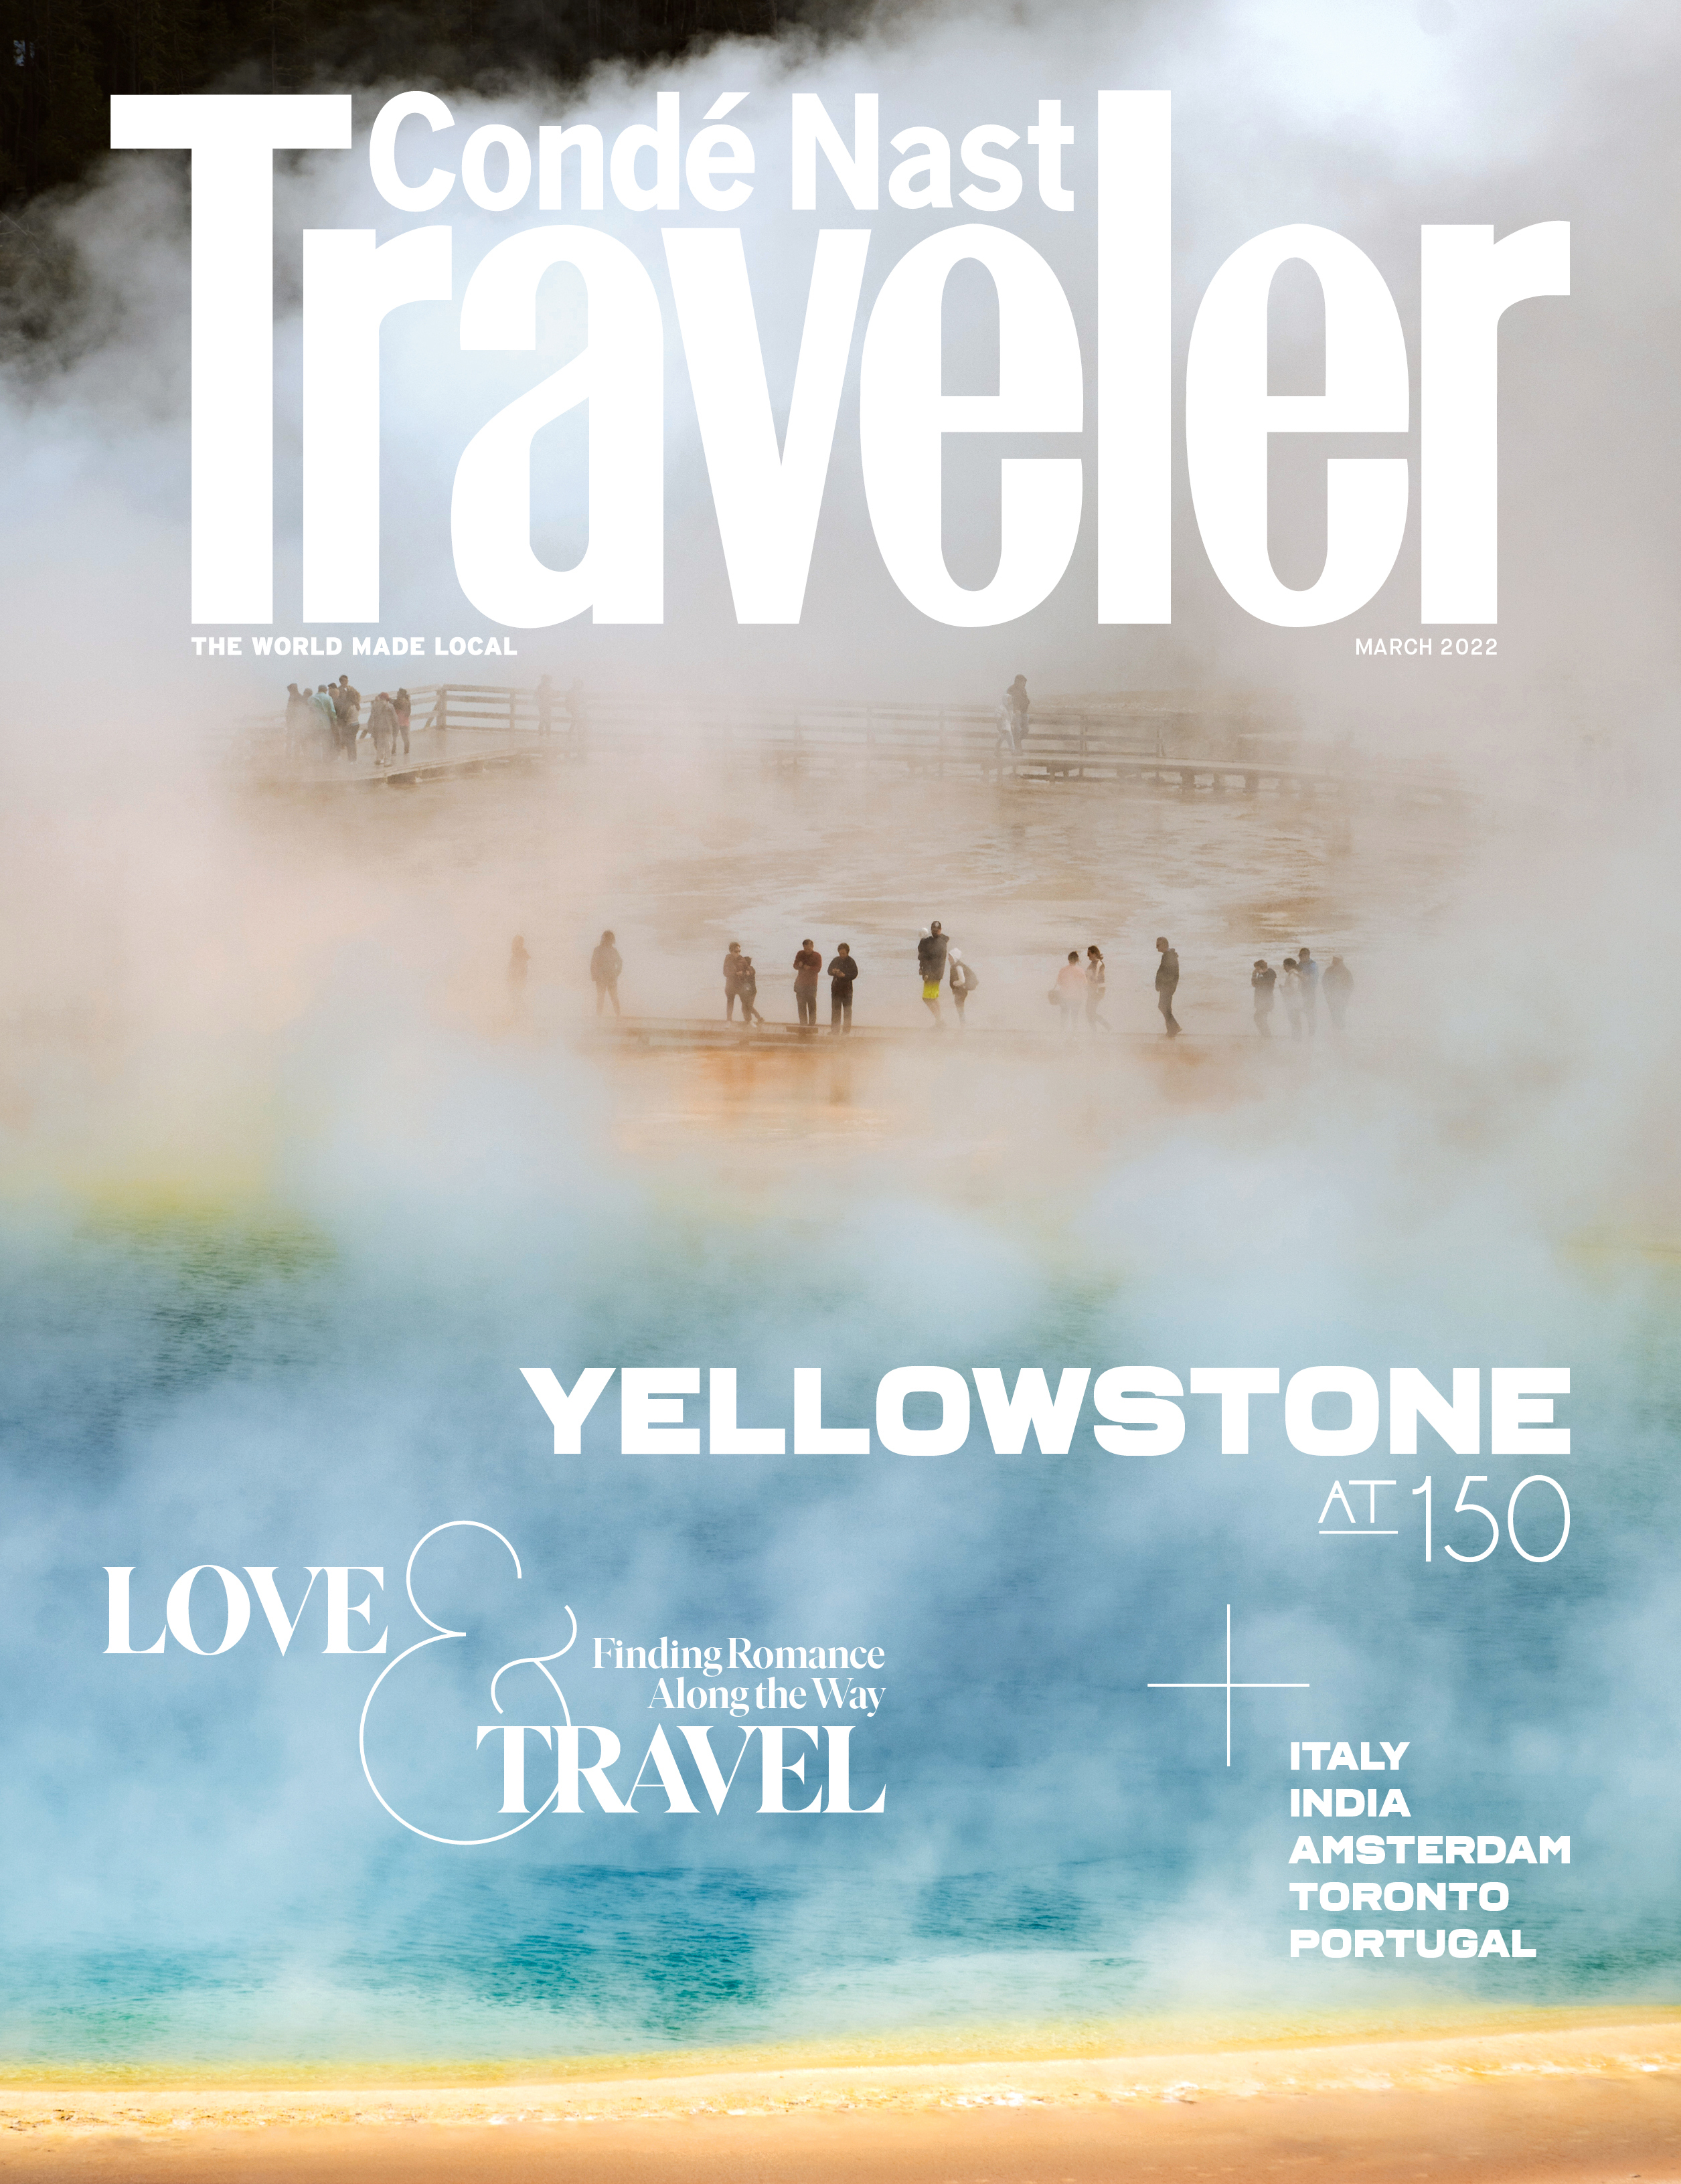 Condé Nast Traveler - “Yellowstone at 150” March 2022